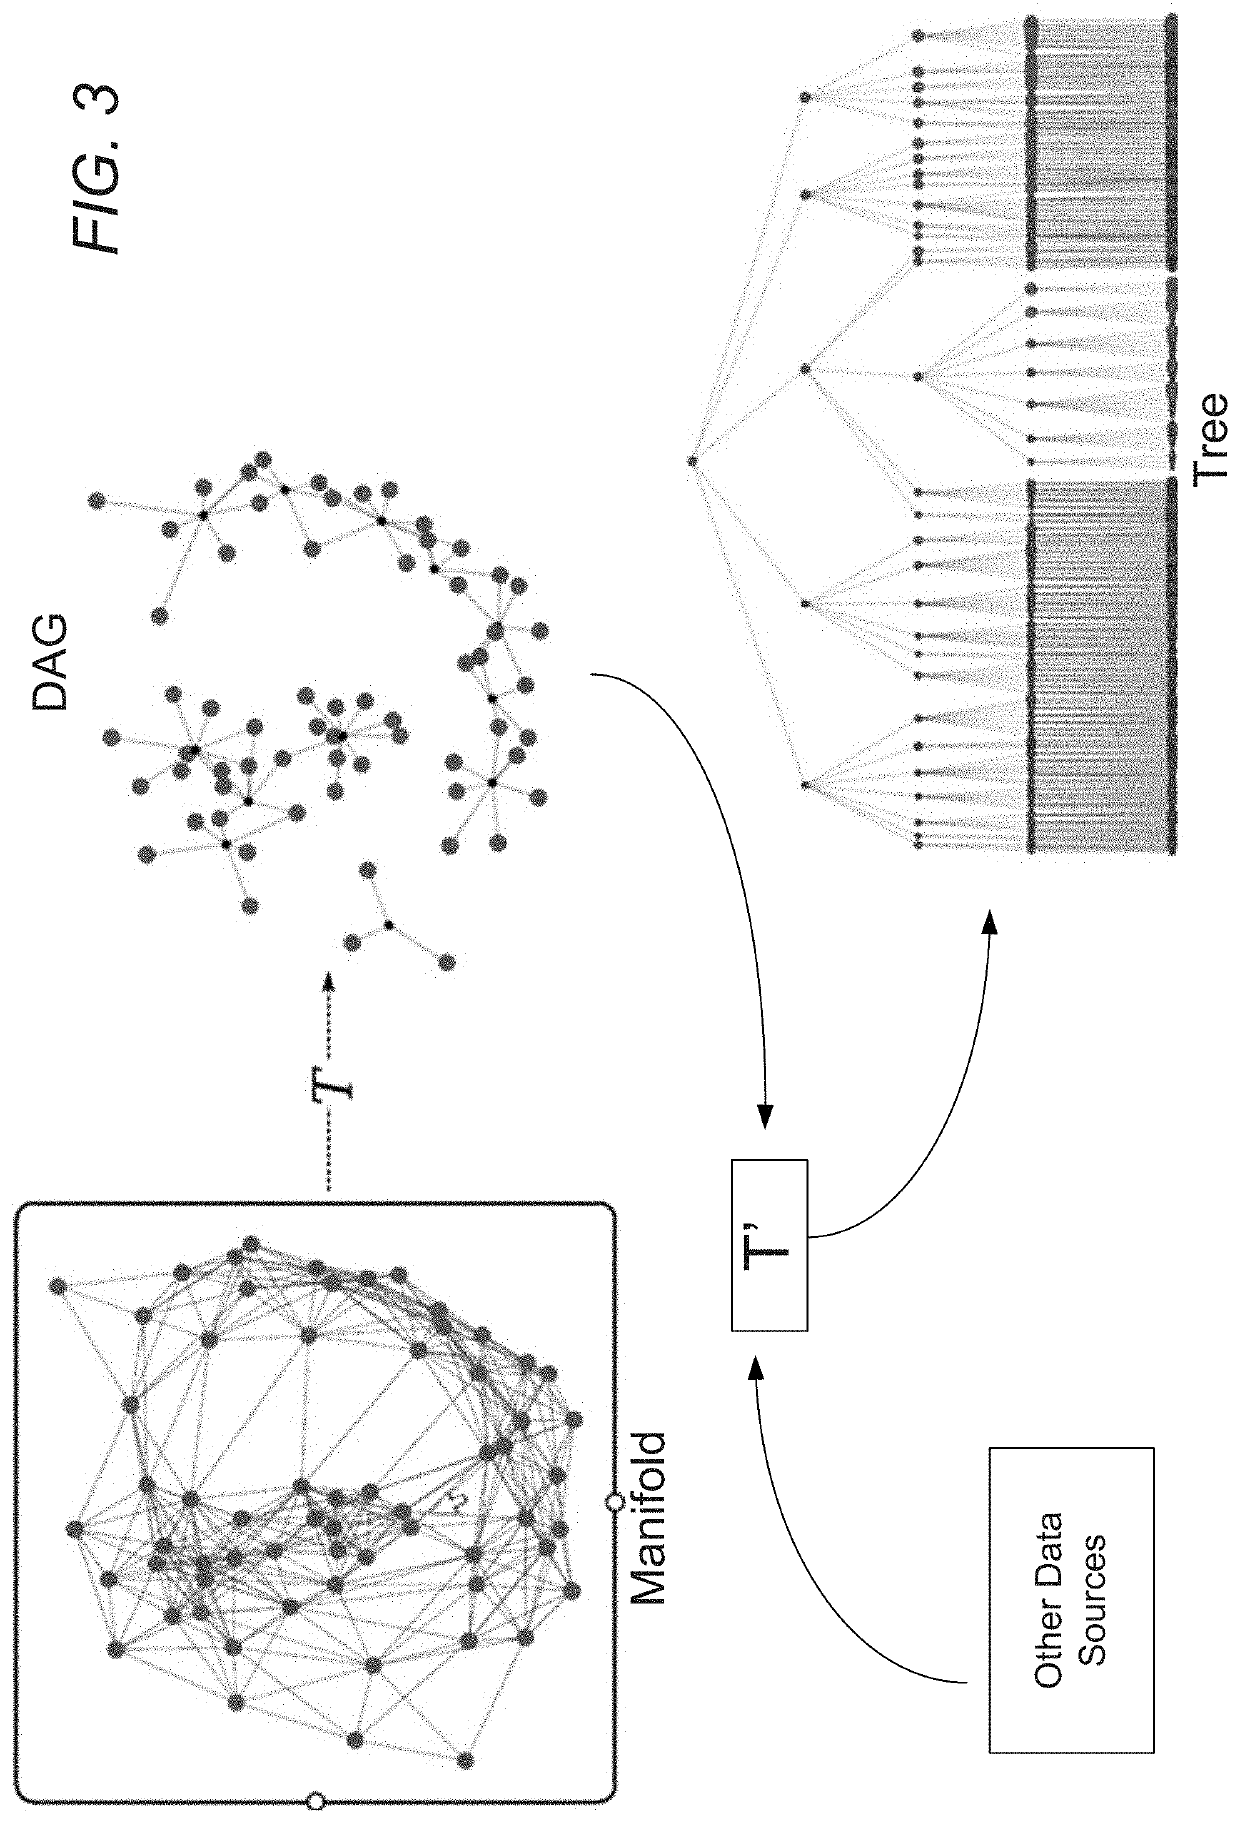 Systems and Methods for Graph-Based AI Training